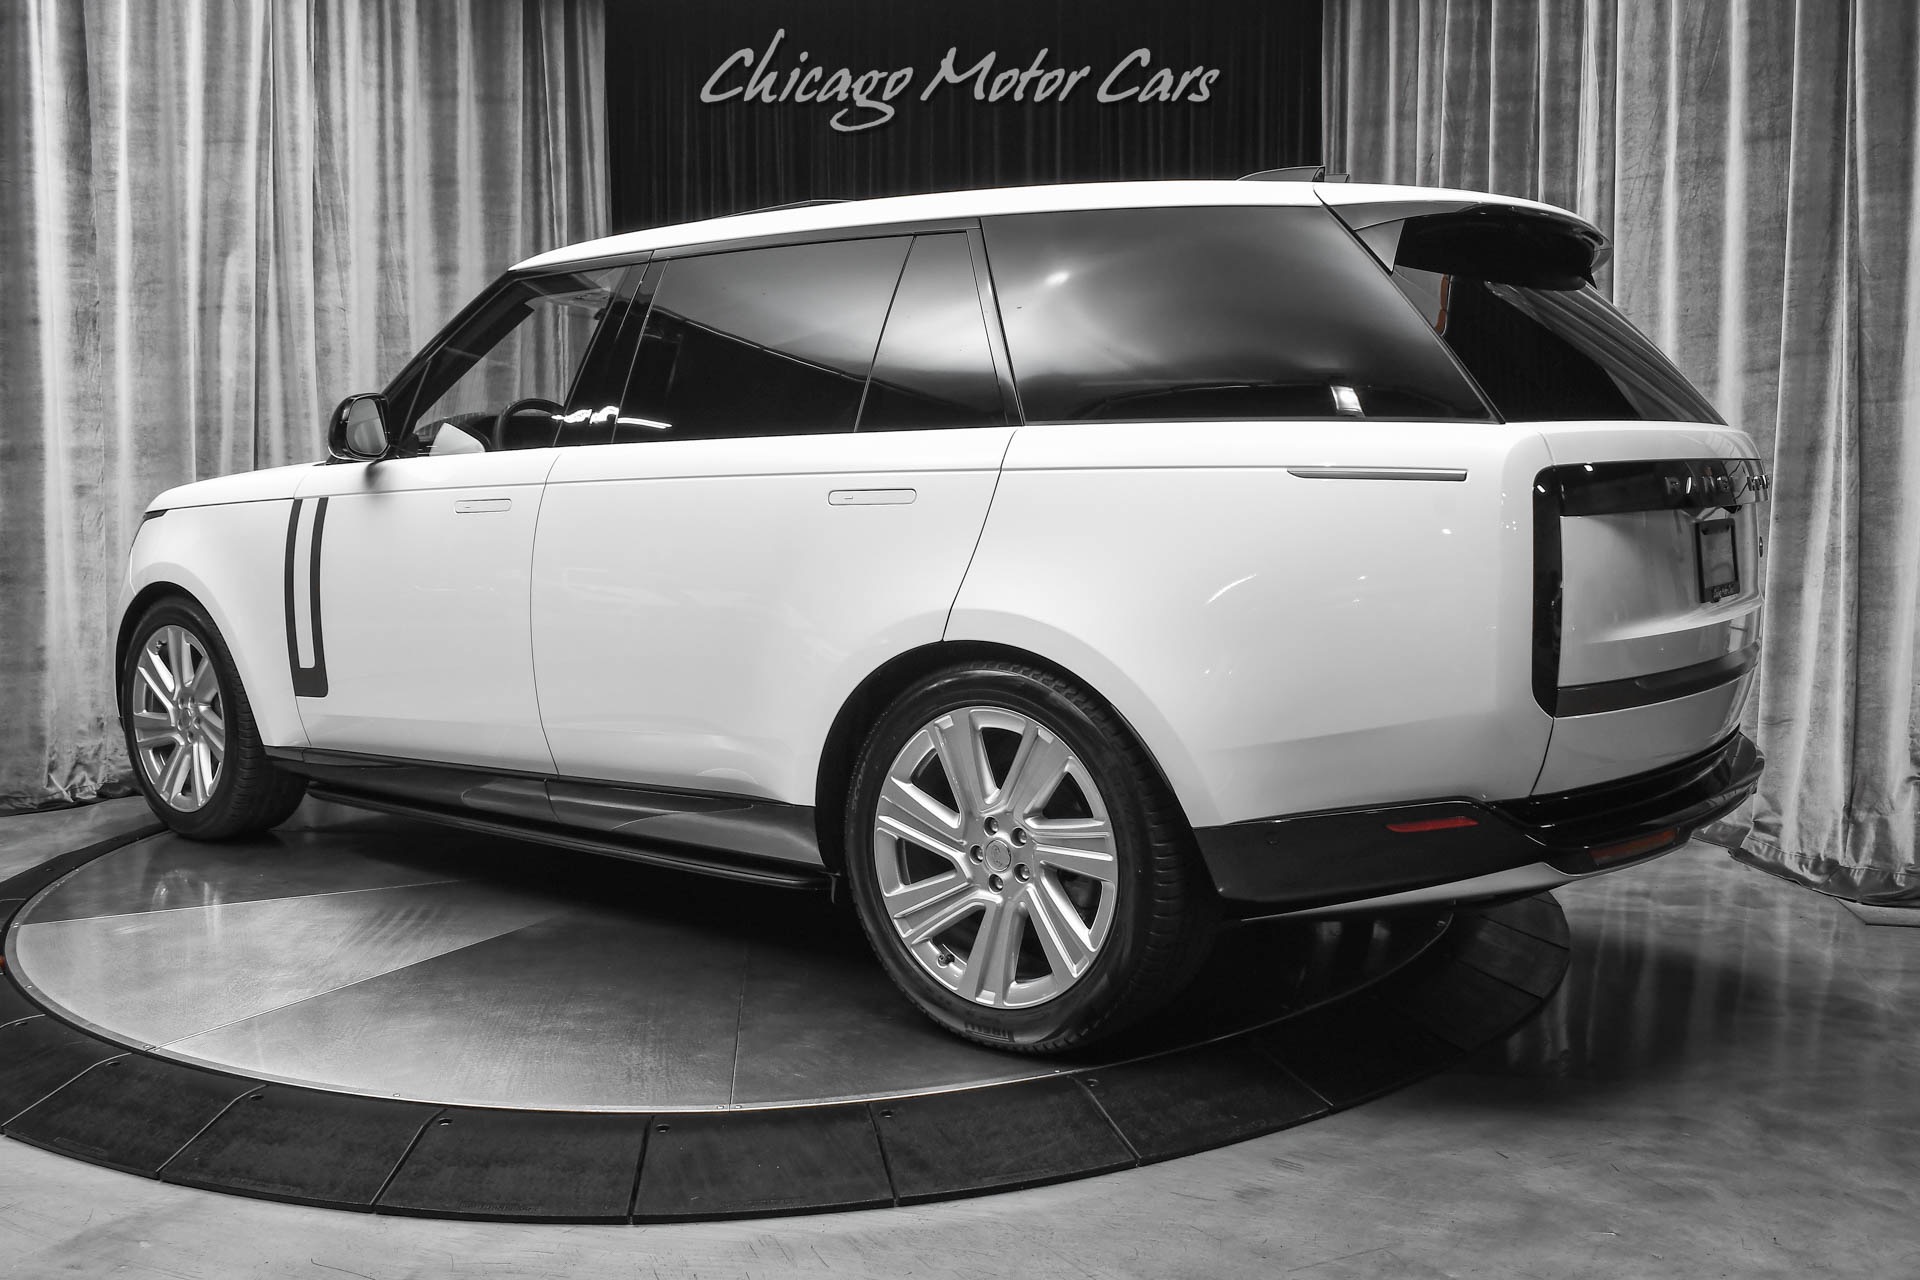 Used-2022-Land-Rover-Range-Rover-SE-LWB-7-SEAT-PEARL-WHITE-MERIDIAN-3D-POWER-RUNNING-BOARDS